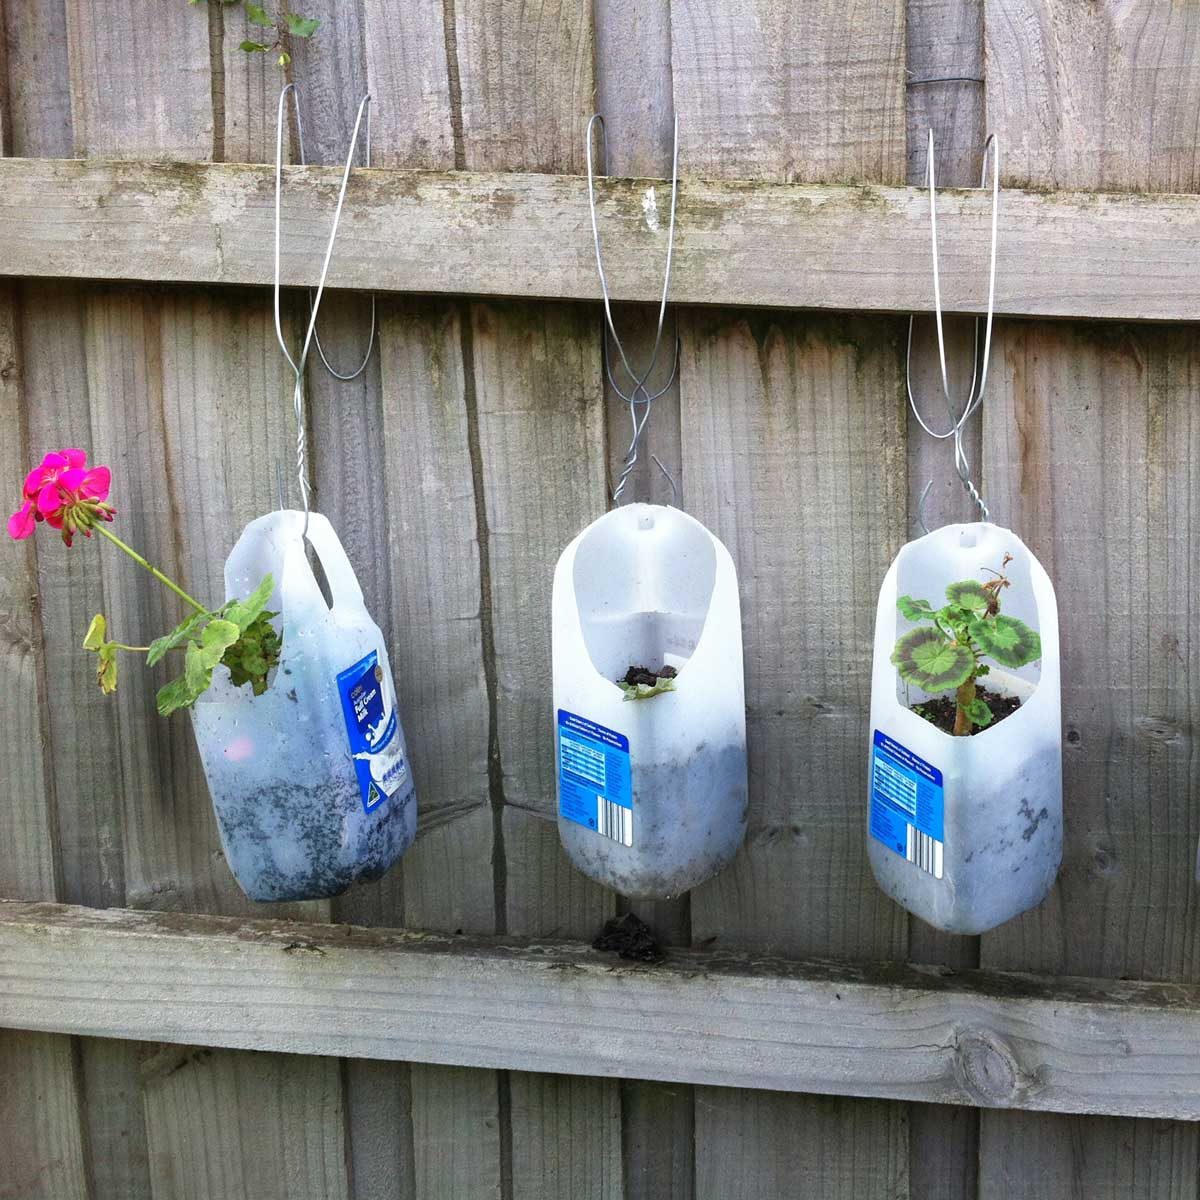 Home and Garden: 35 Uses for Plastic Milk Jugs